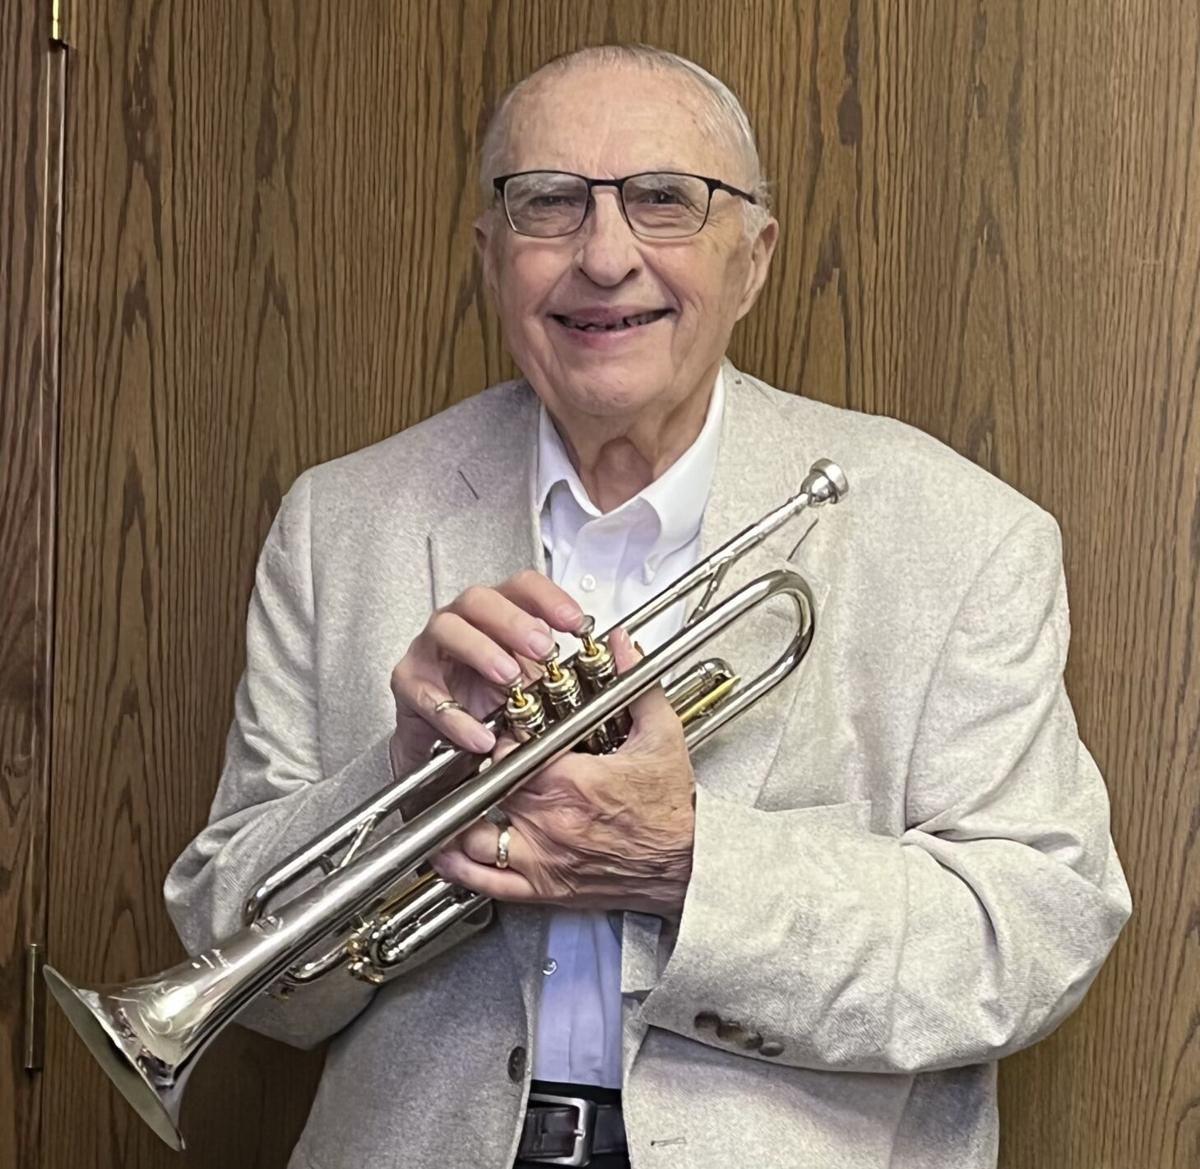 MUSIC MAN Meidl supplies instruments to area schools, Local News